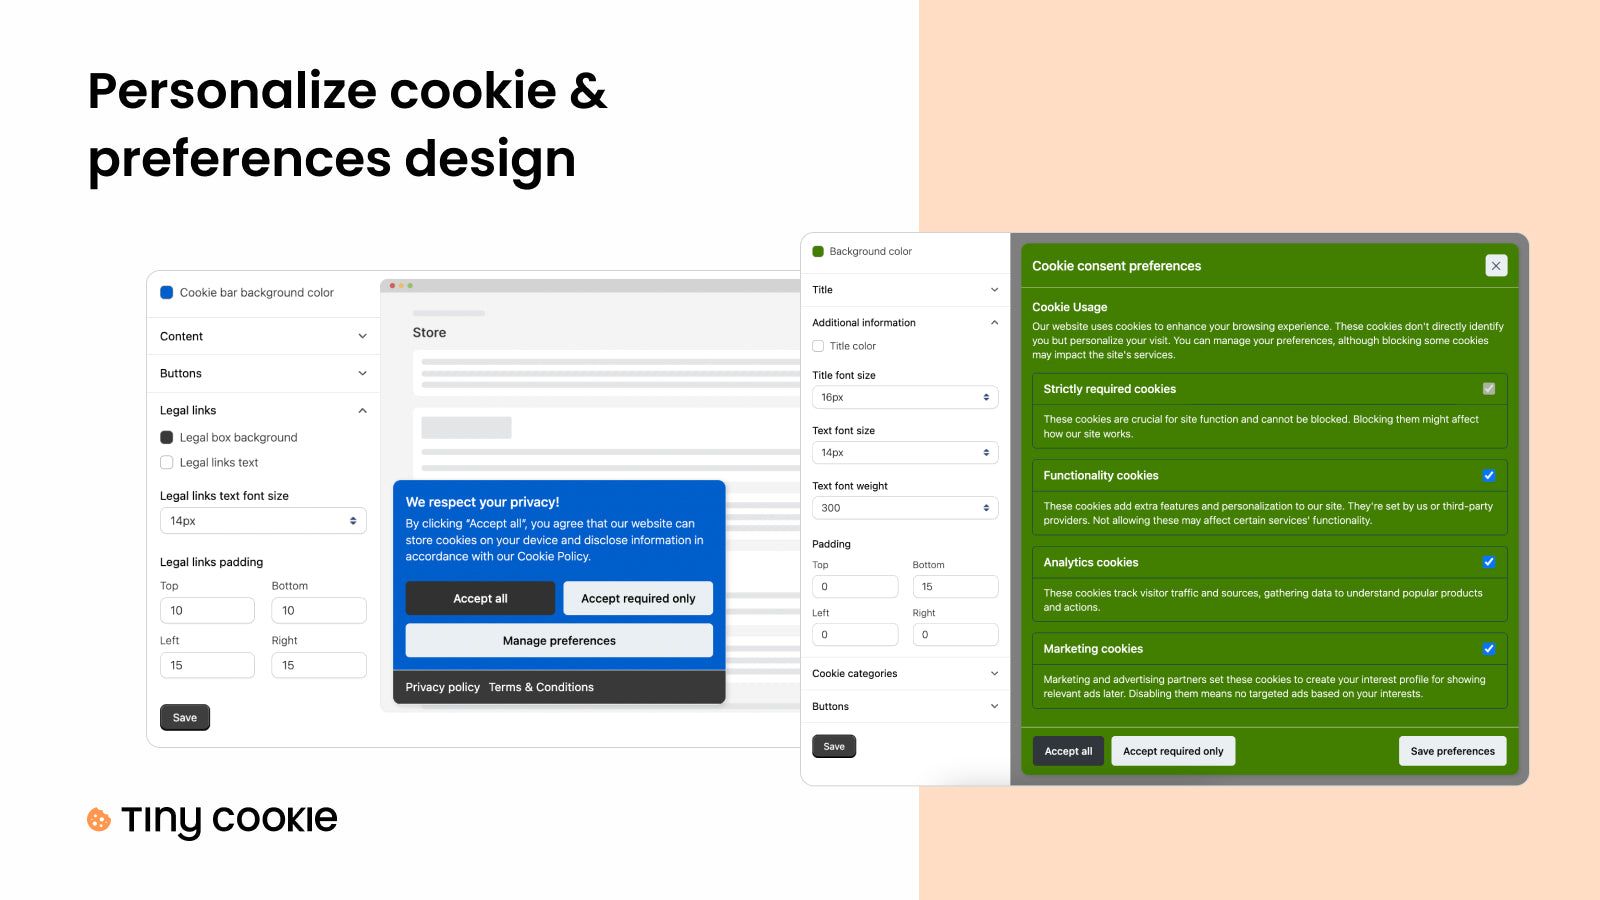 Personalize cookie & preferences design in a second